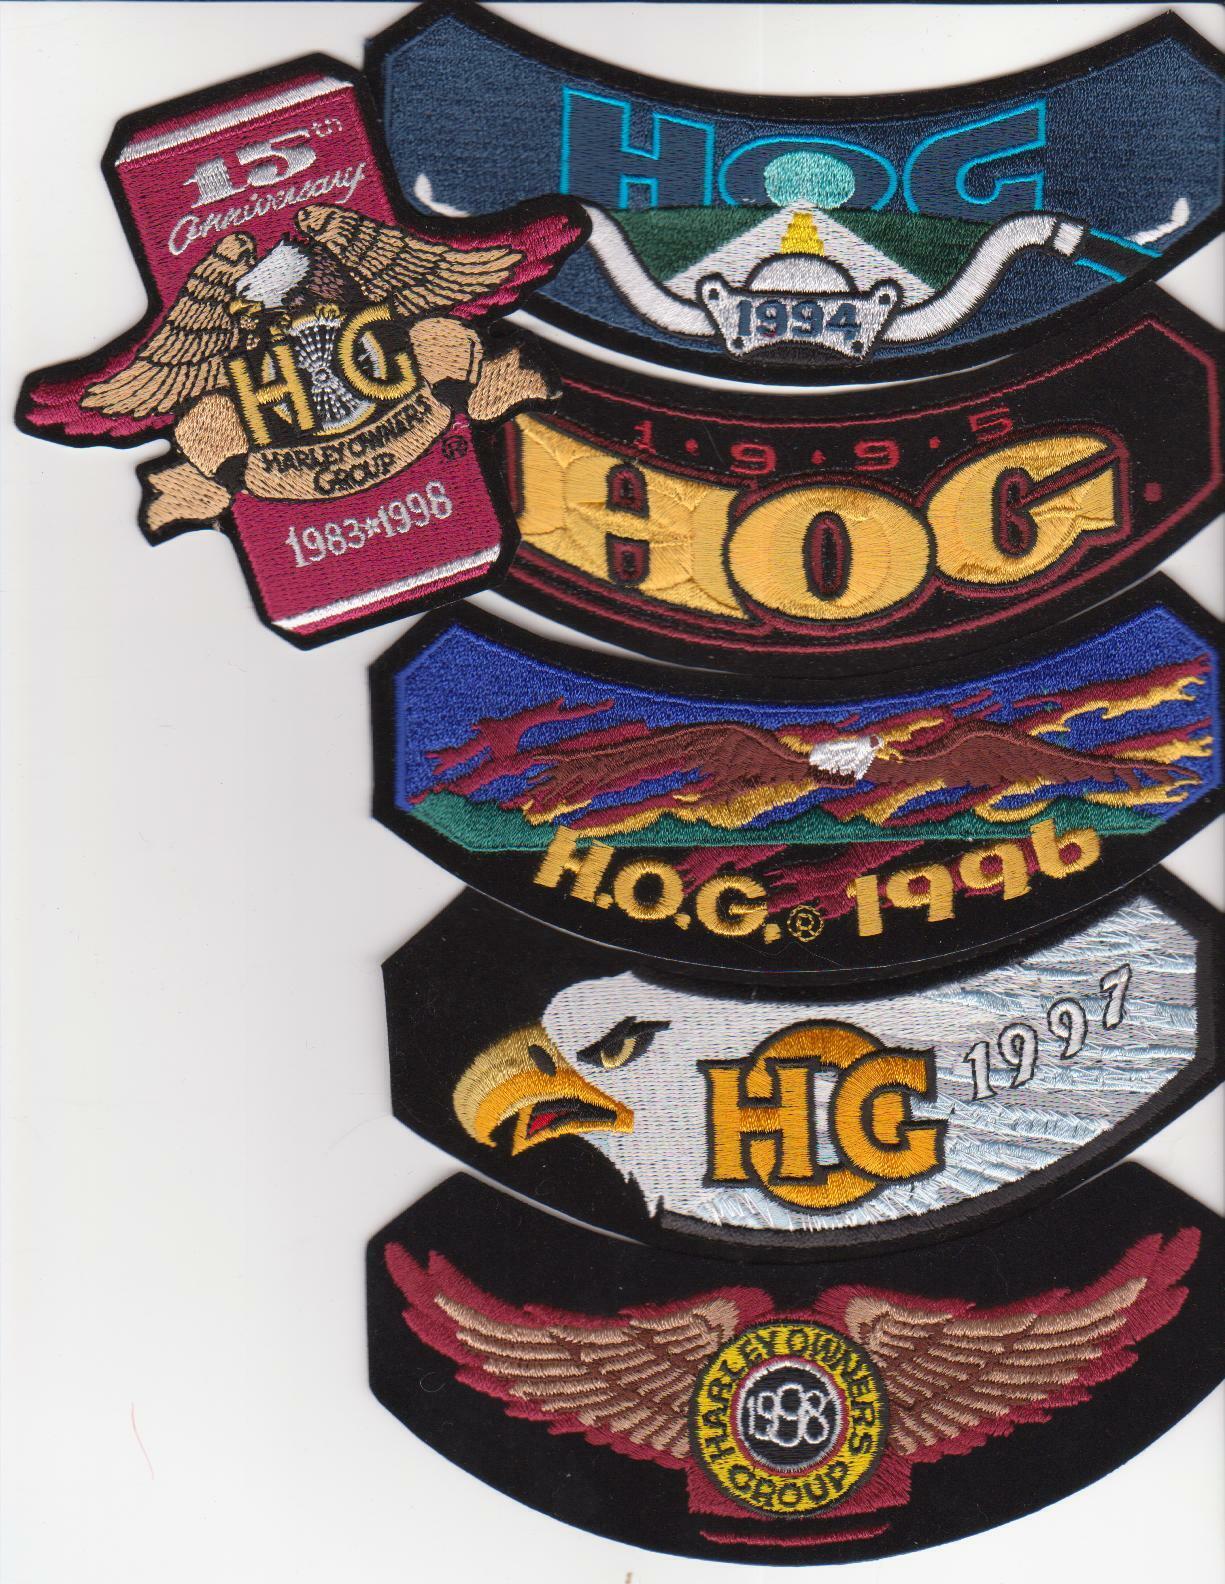 HOG 1994, 1995, 1996, 1997, 1998, & 15th Anniversary patches HARLEY OWNERS GROUP